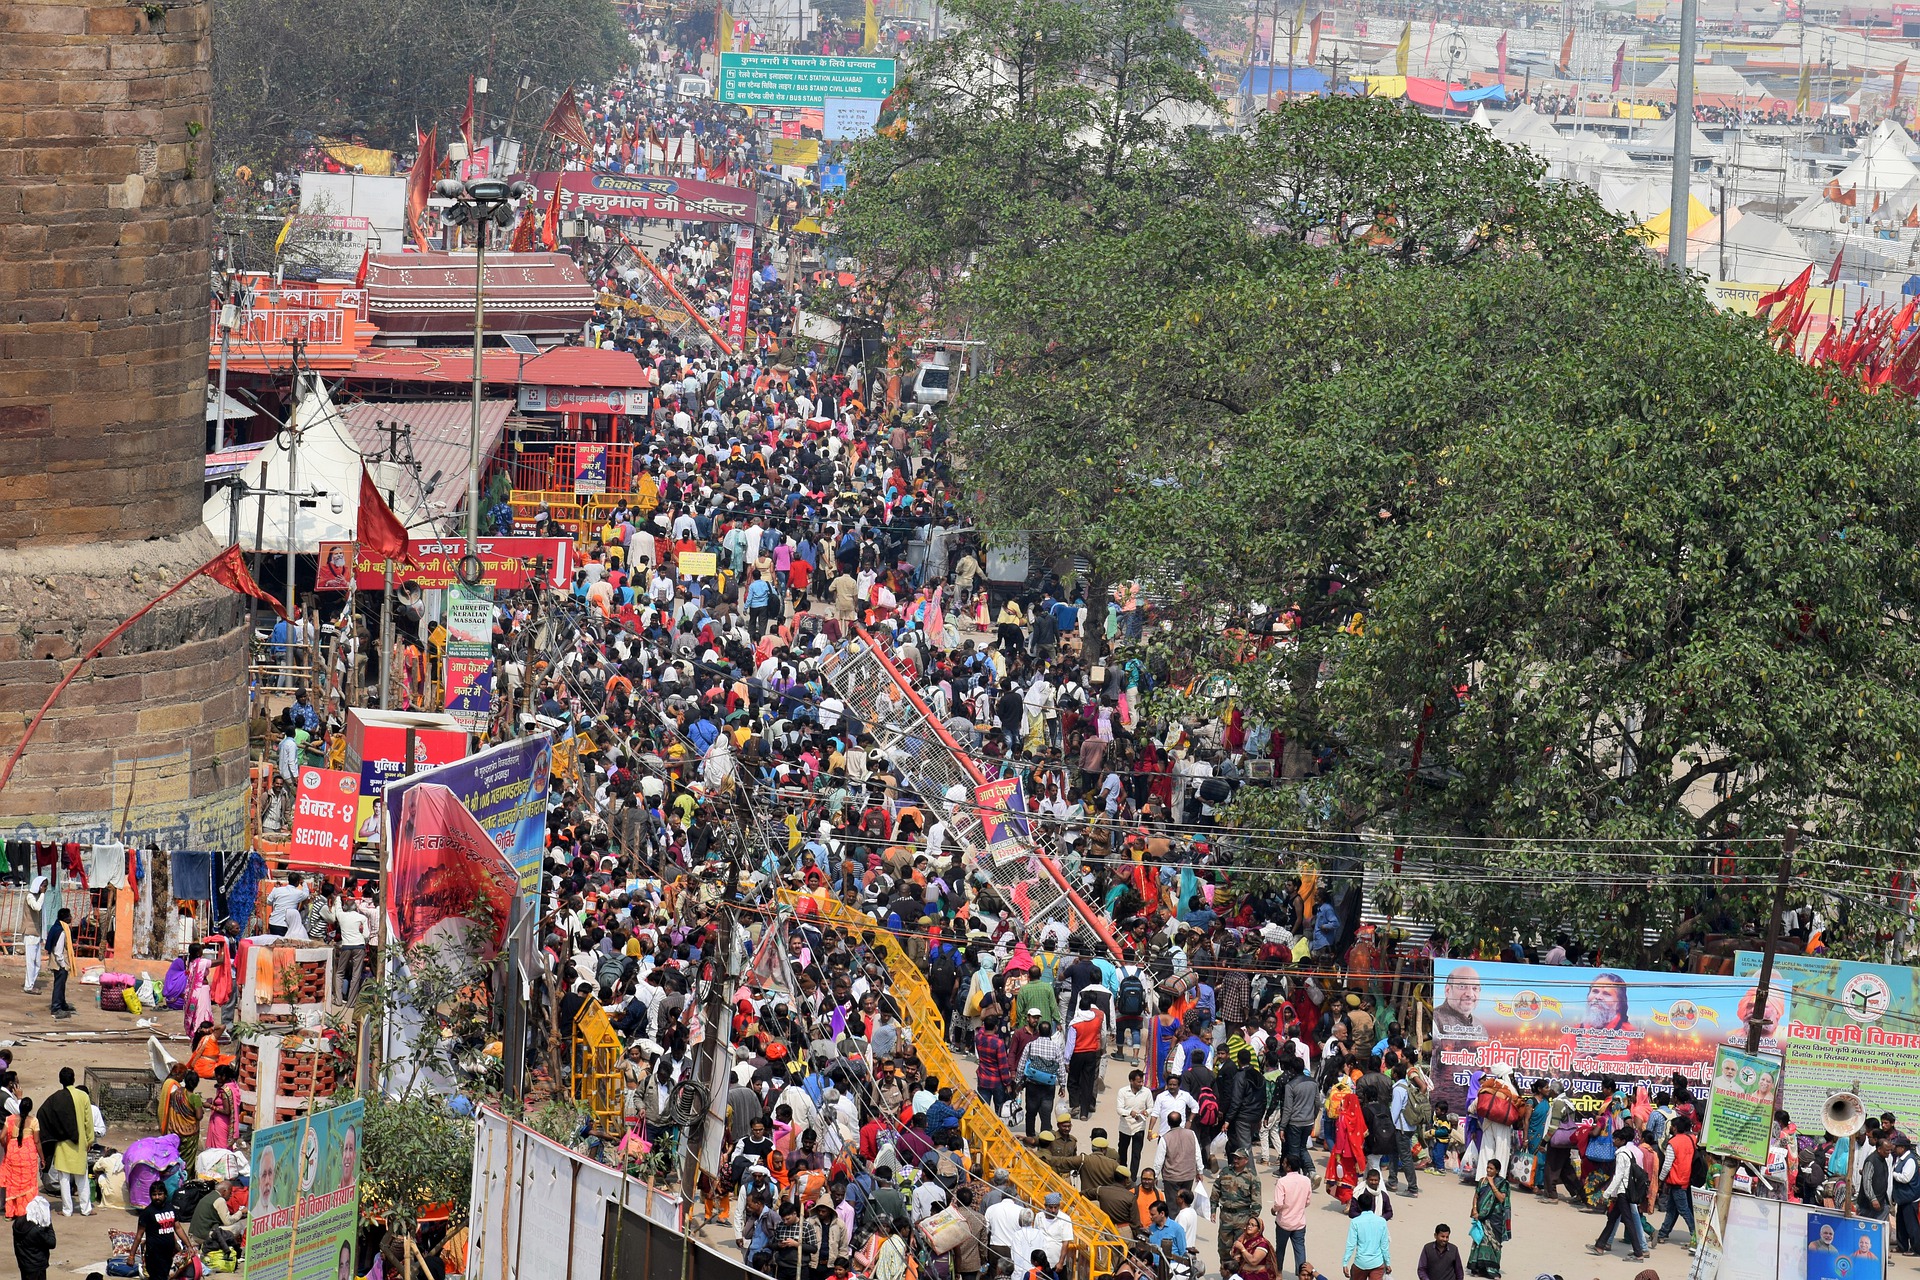 The Kumbh Mela festival brings together millions of people in India.